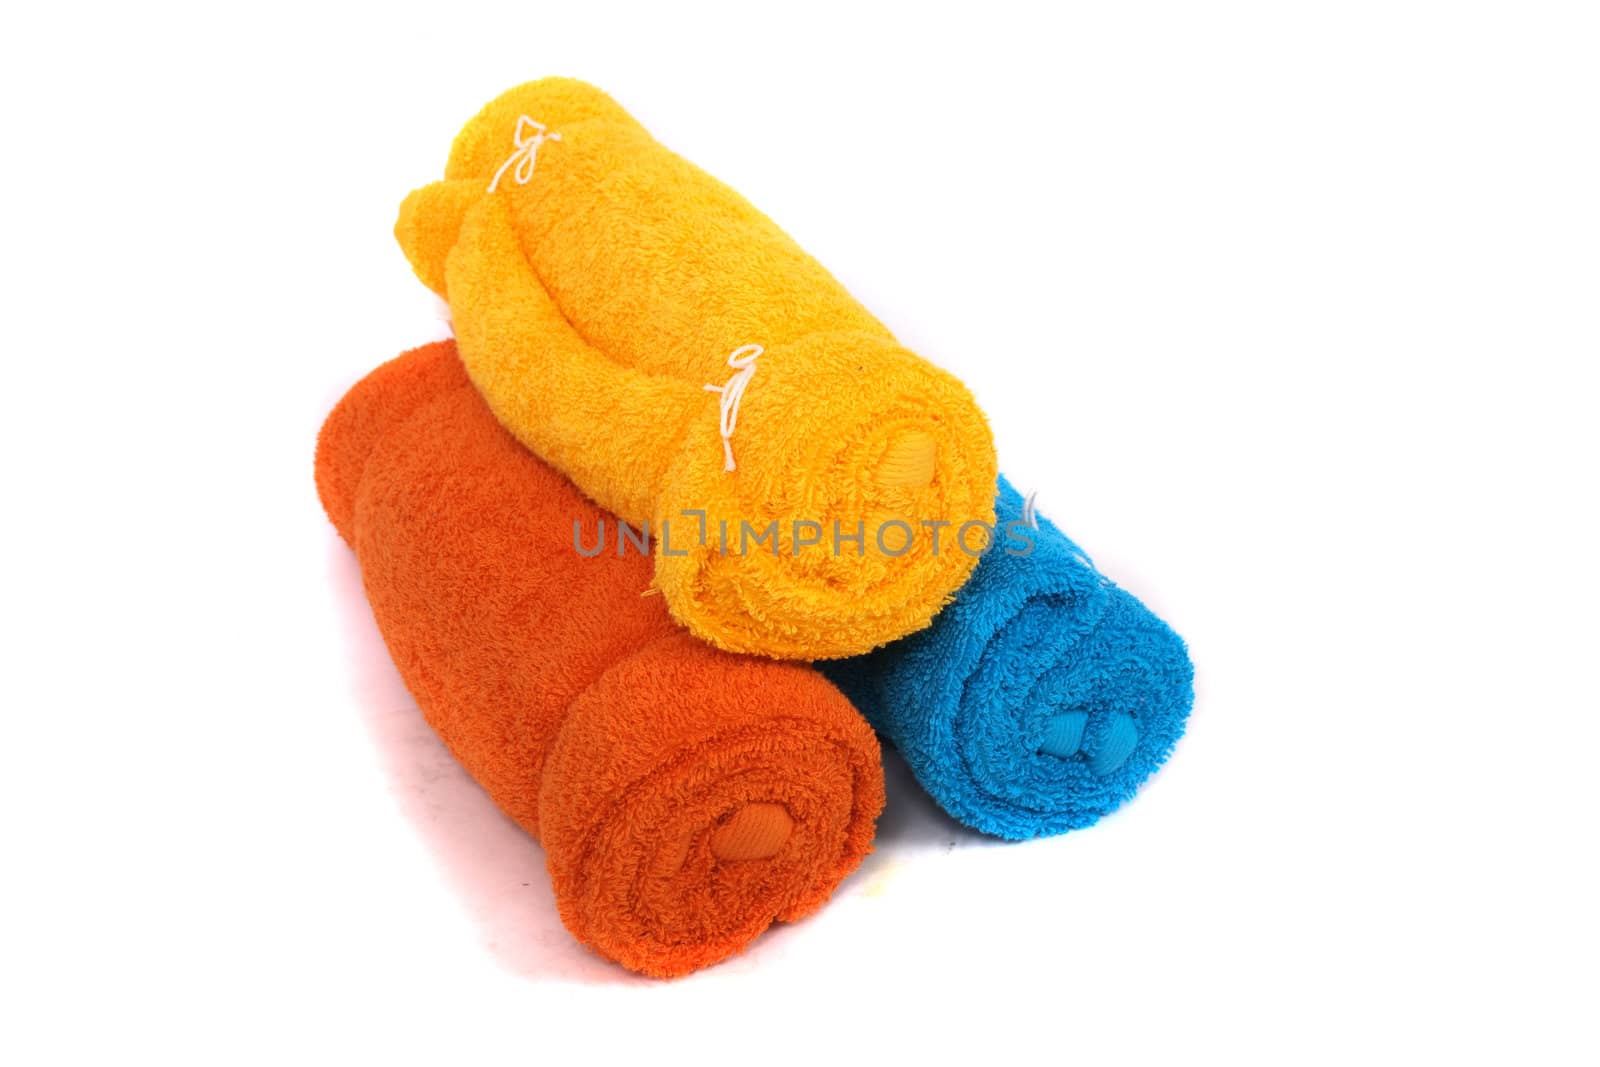 yellow, red and yellow towels on the white background